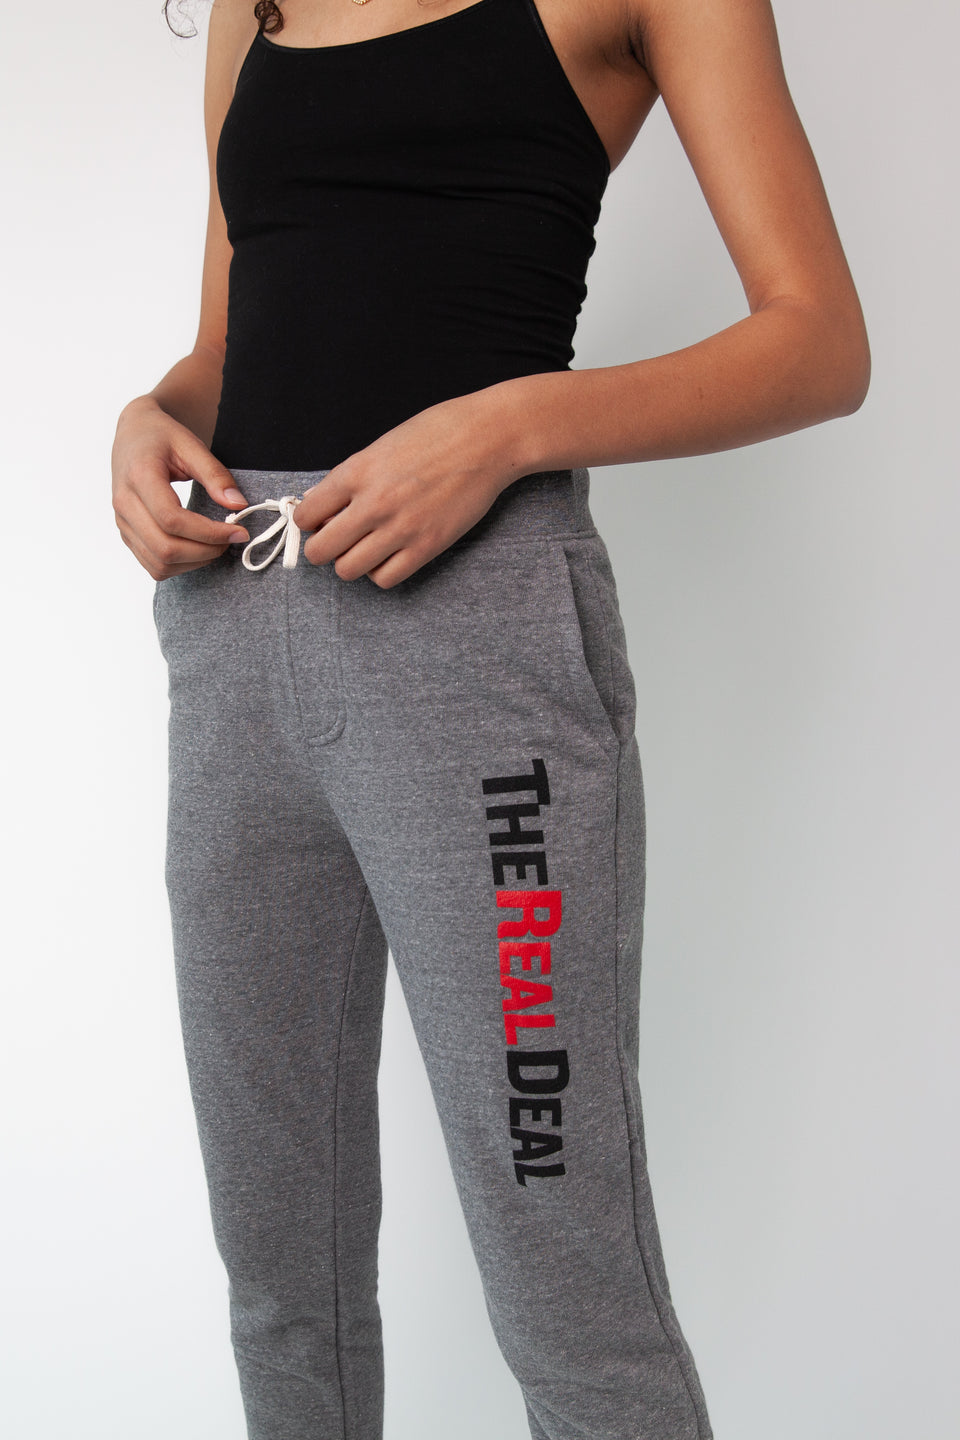 The Real Deal sweatpants